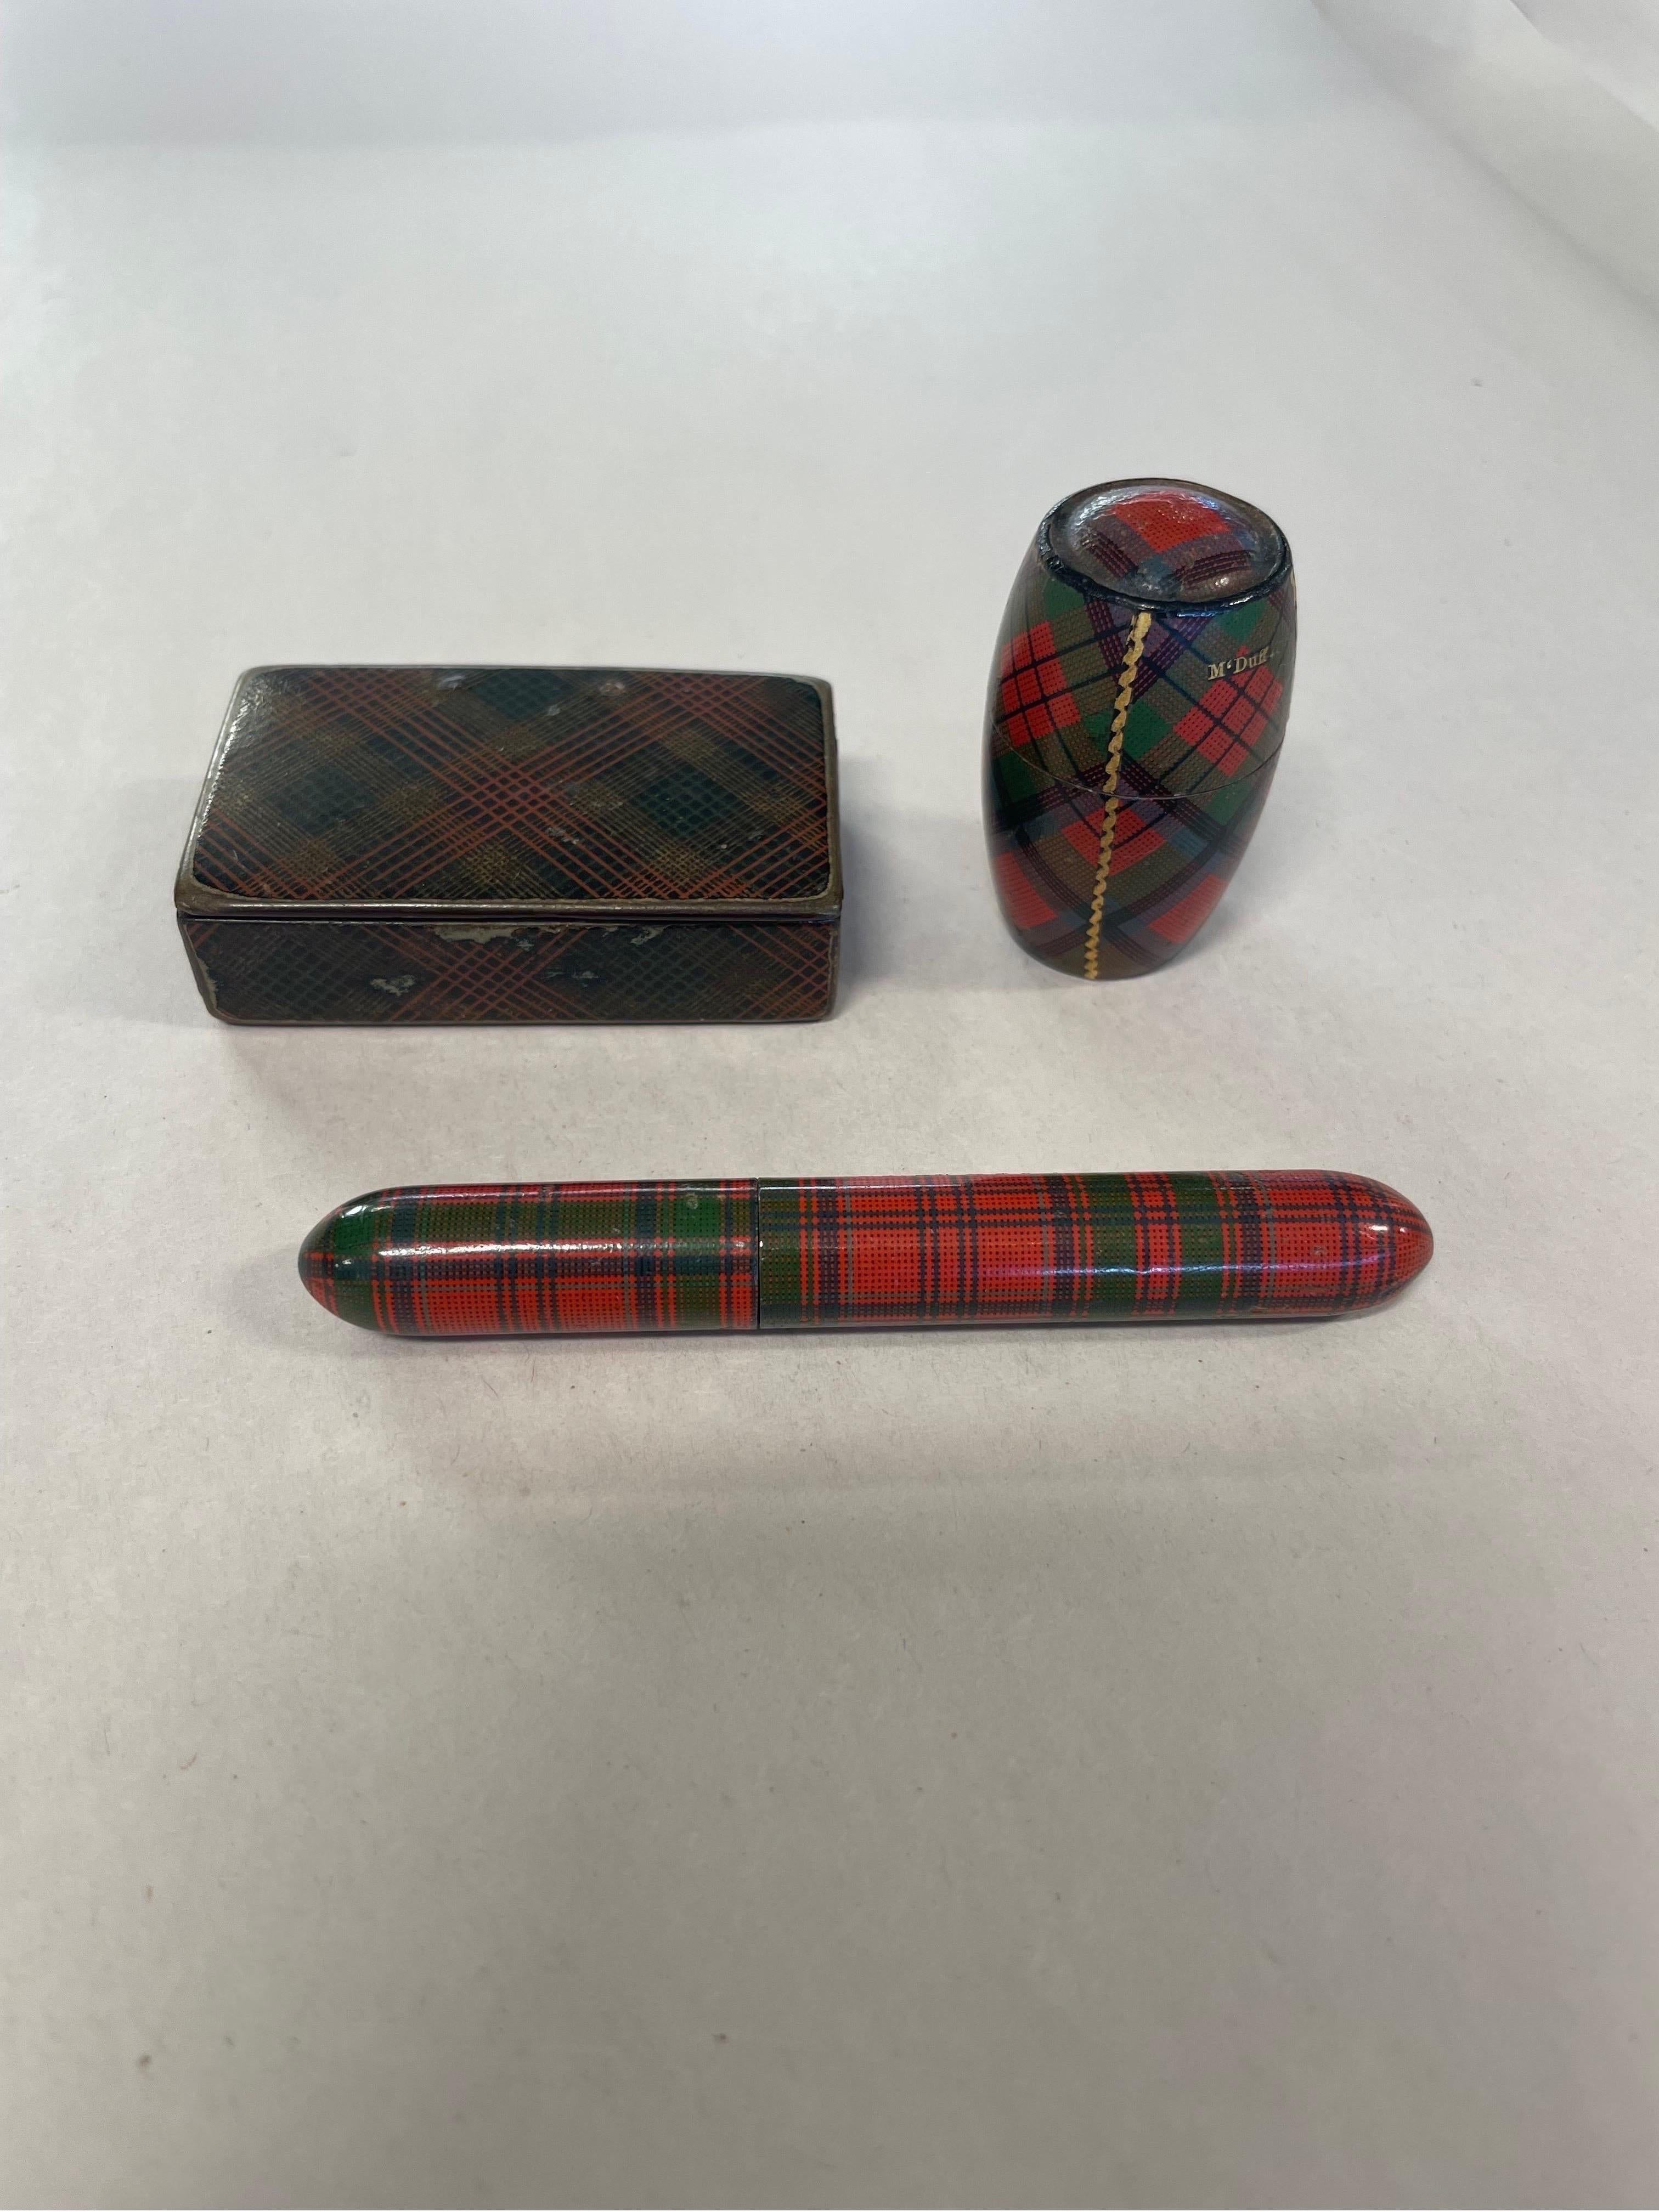 3 Pc, Antique Scottish Tartanware Sewing & Snuff box objects.


A grouping of 3 antique Scottish tartan ware objects including a thimble in its original holder, a two piece needle case and a small trinket or snuff box.


Some wear present to